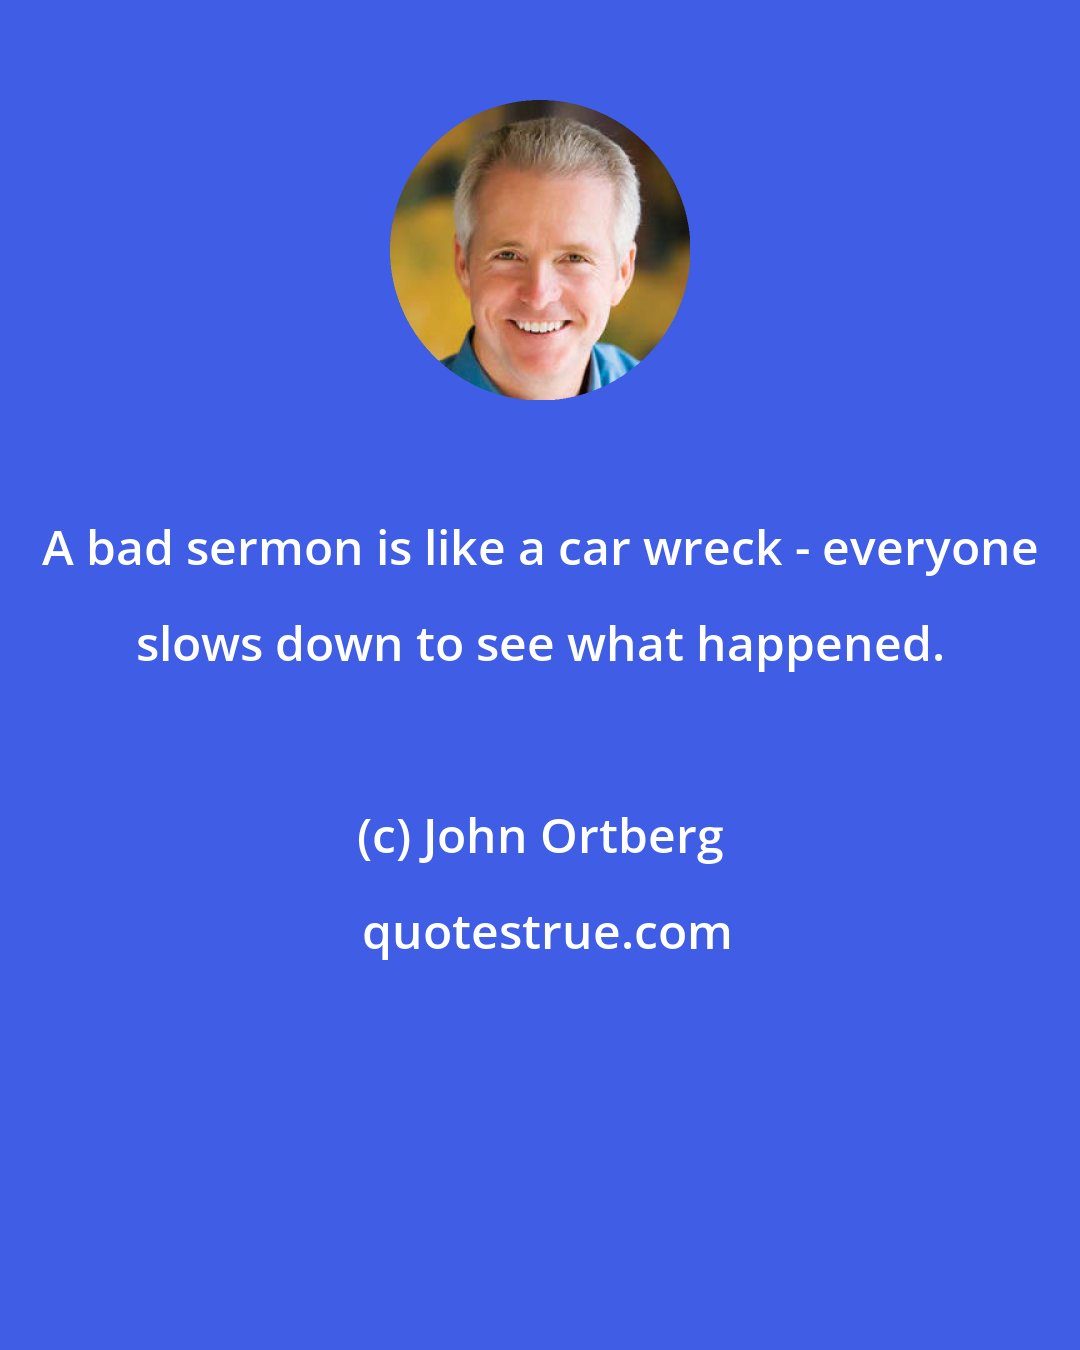 John Ortberg: A bad sermon is like a car wreck - everyone slows down to see what happened.